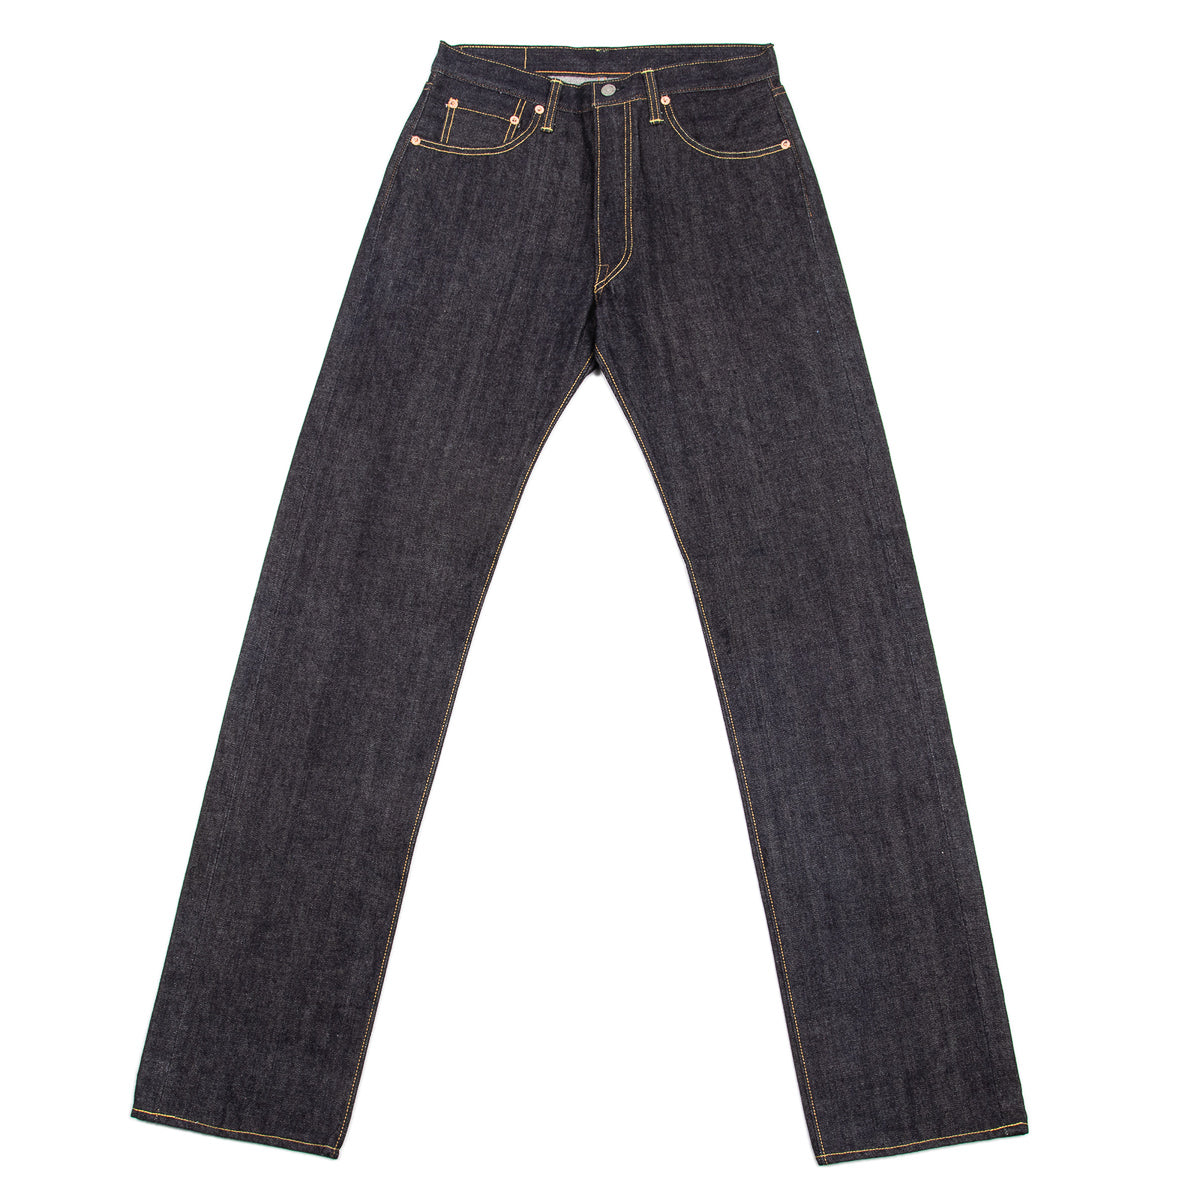 The Real McCoy's The Real McCoy's Lot.001XX Jeans 29